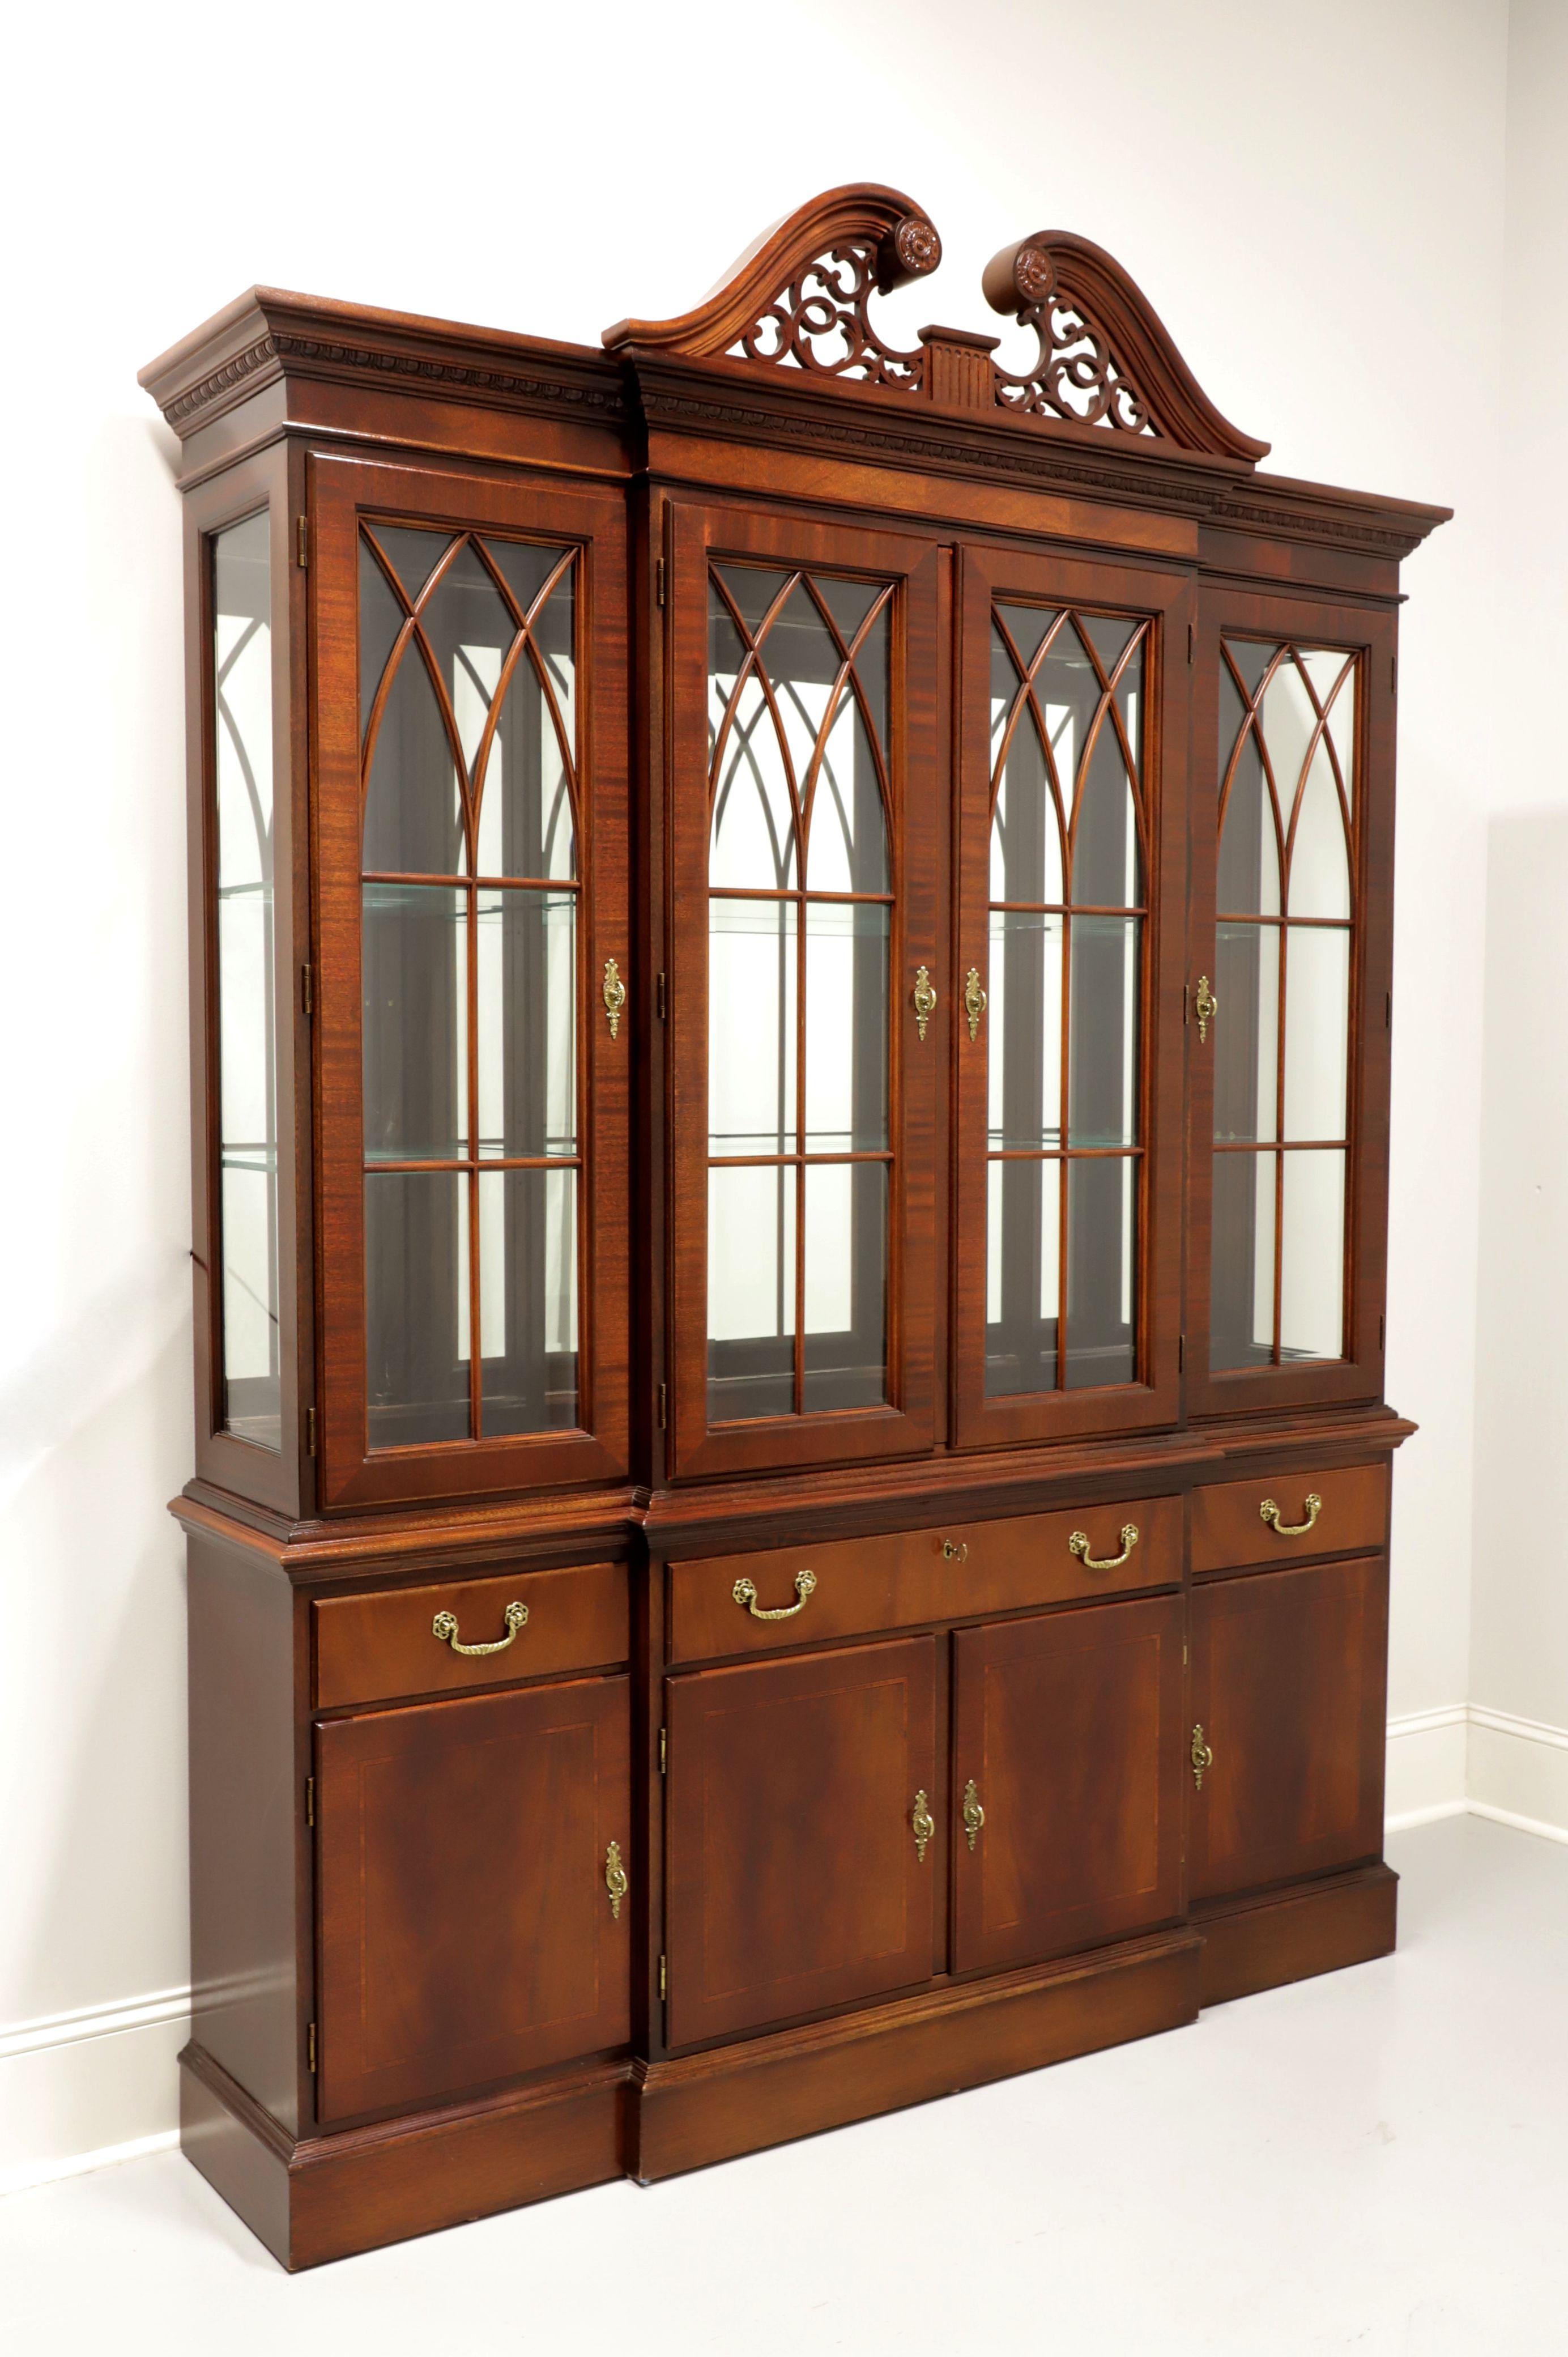 ETHAN ALLEN Inlaid Mahogany 18th Century Collection Breakfront China Cabinet 7